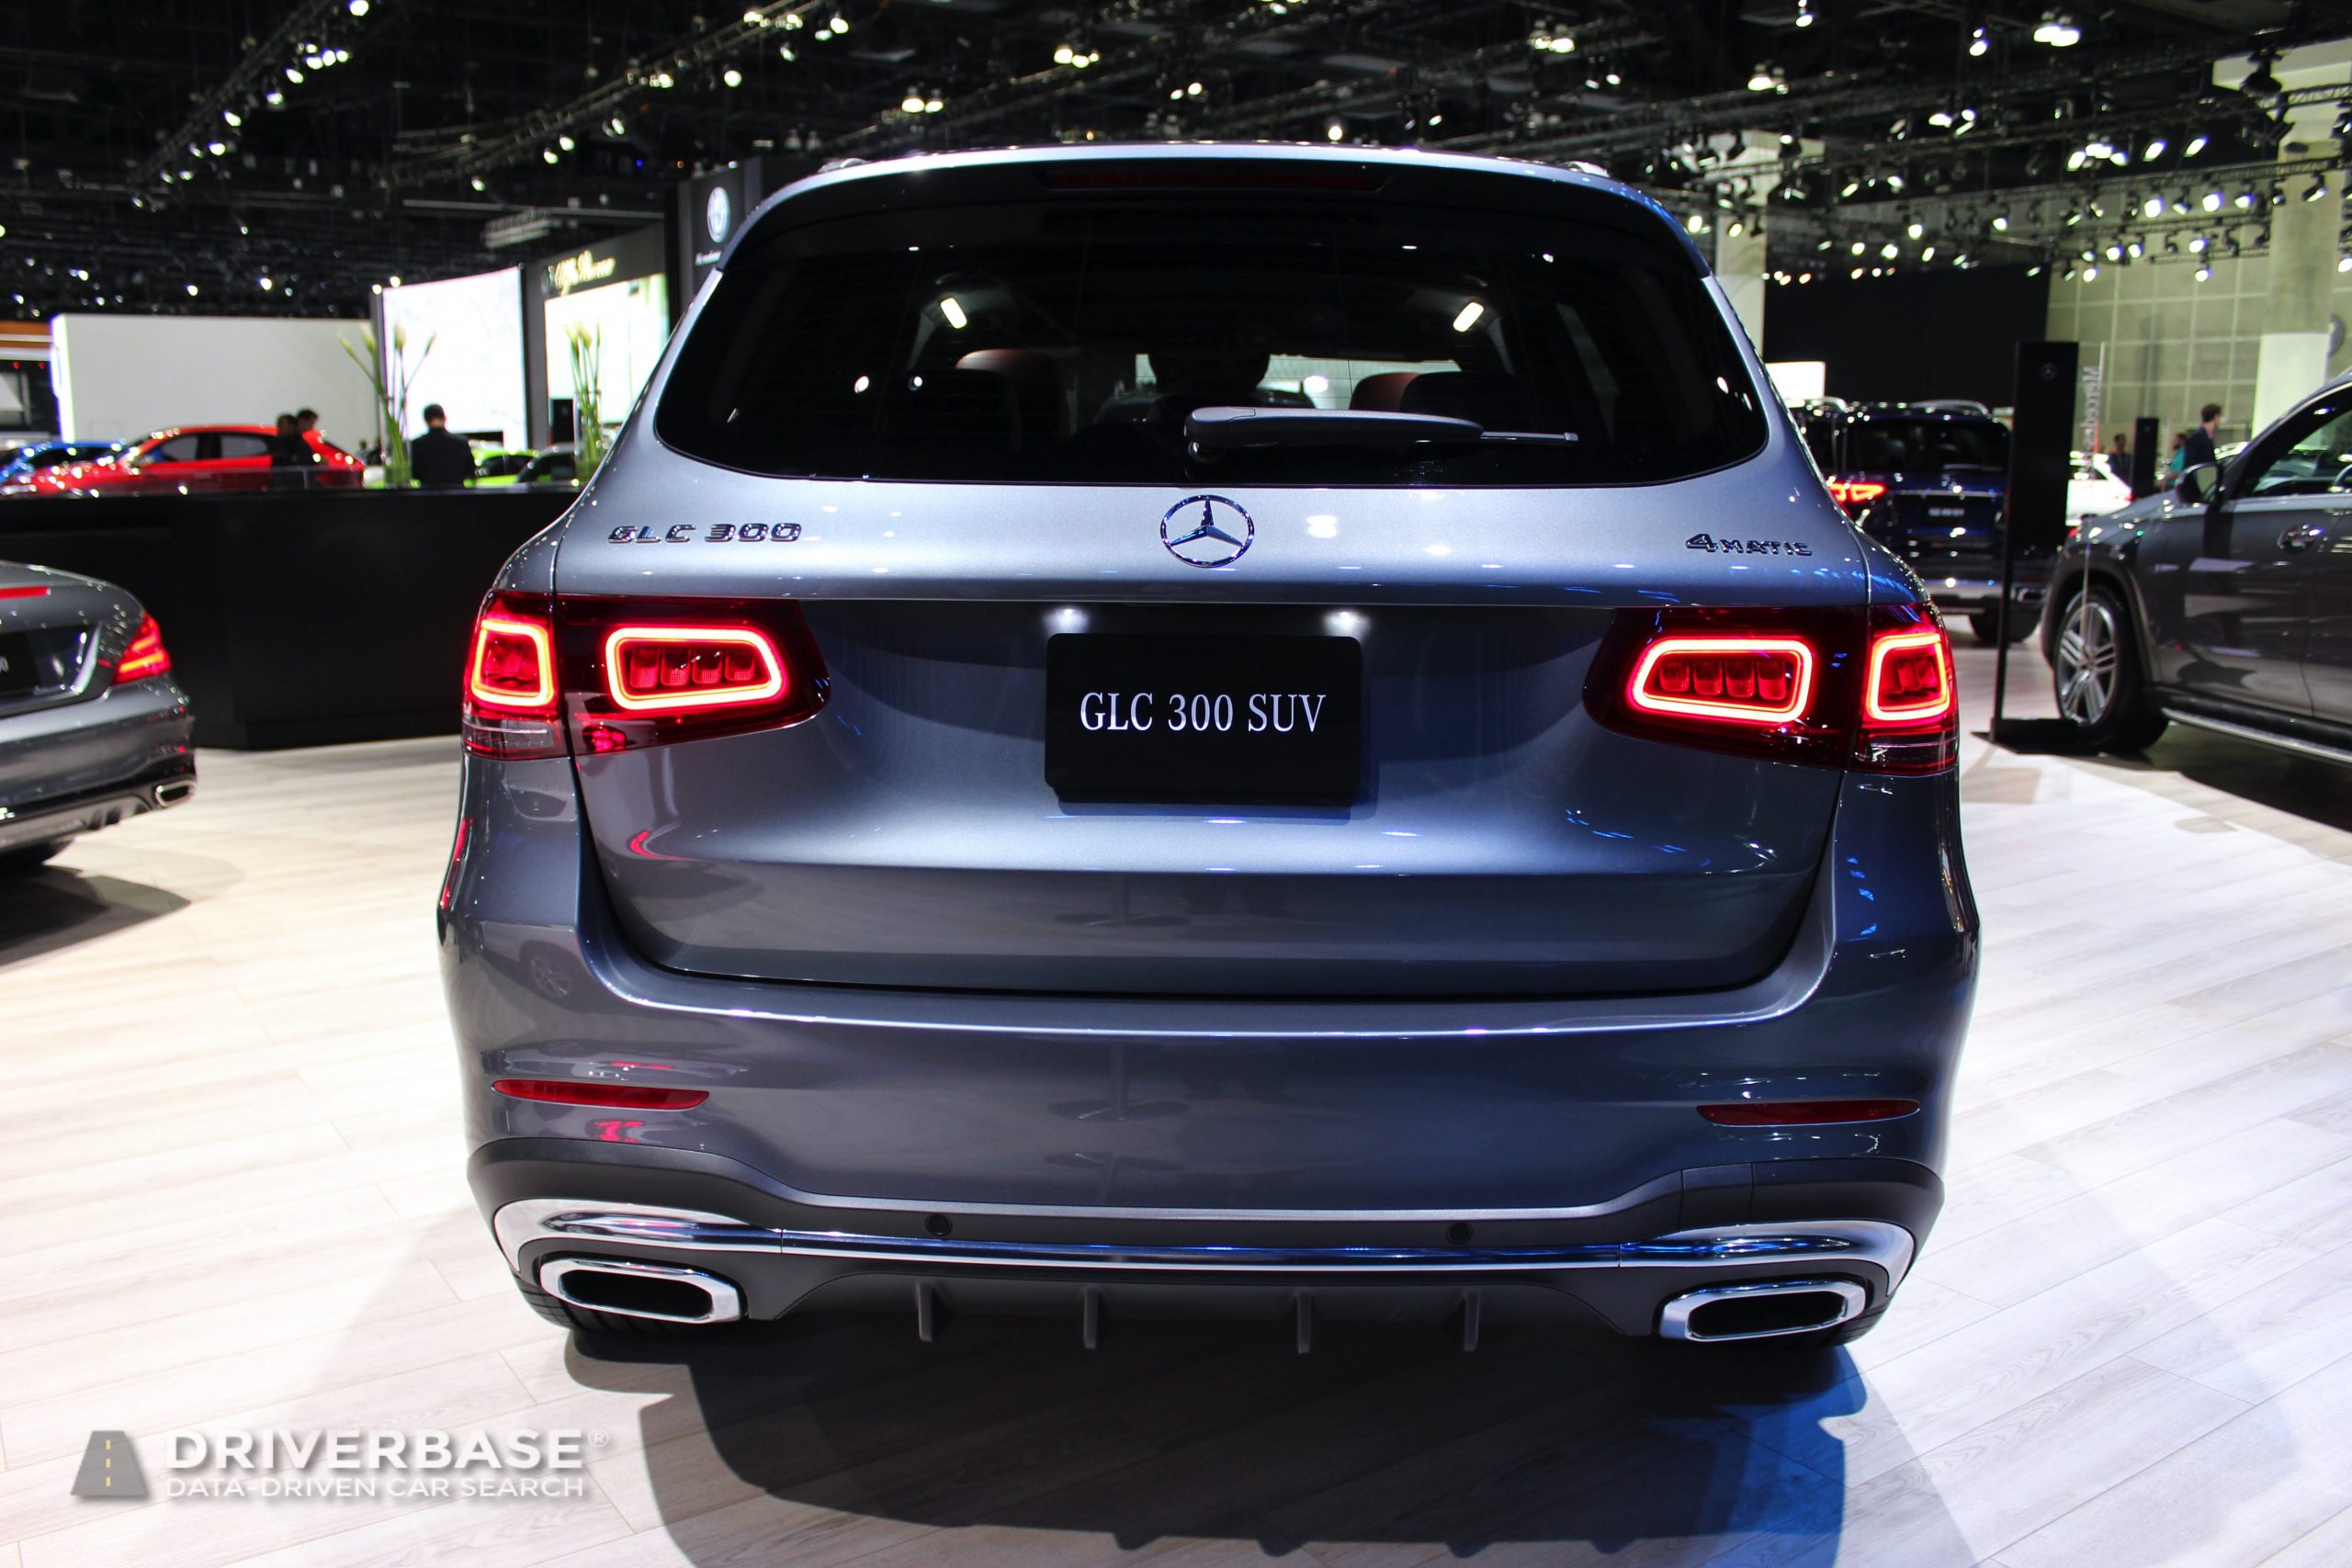 2020 Mercedes-Benz GLC 300 at the 2019 Los Angeles Auto Show